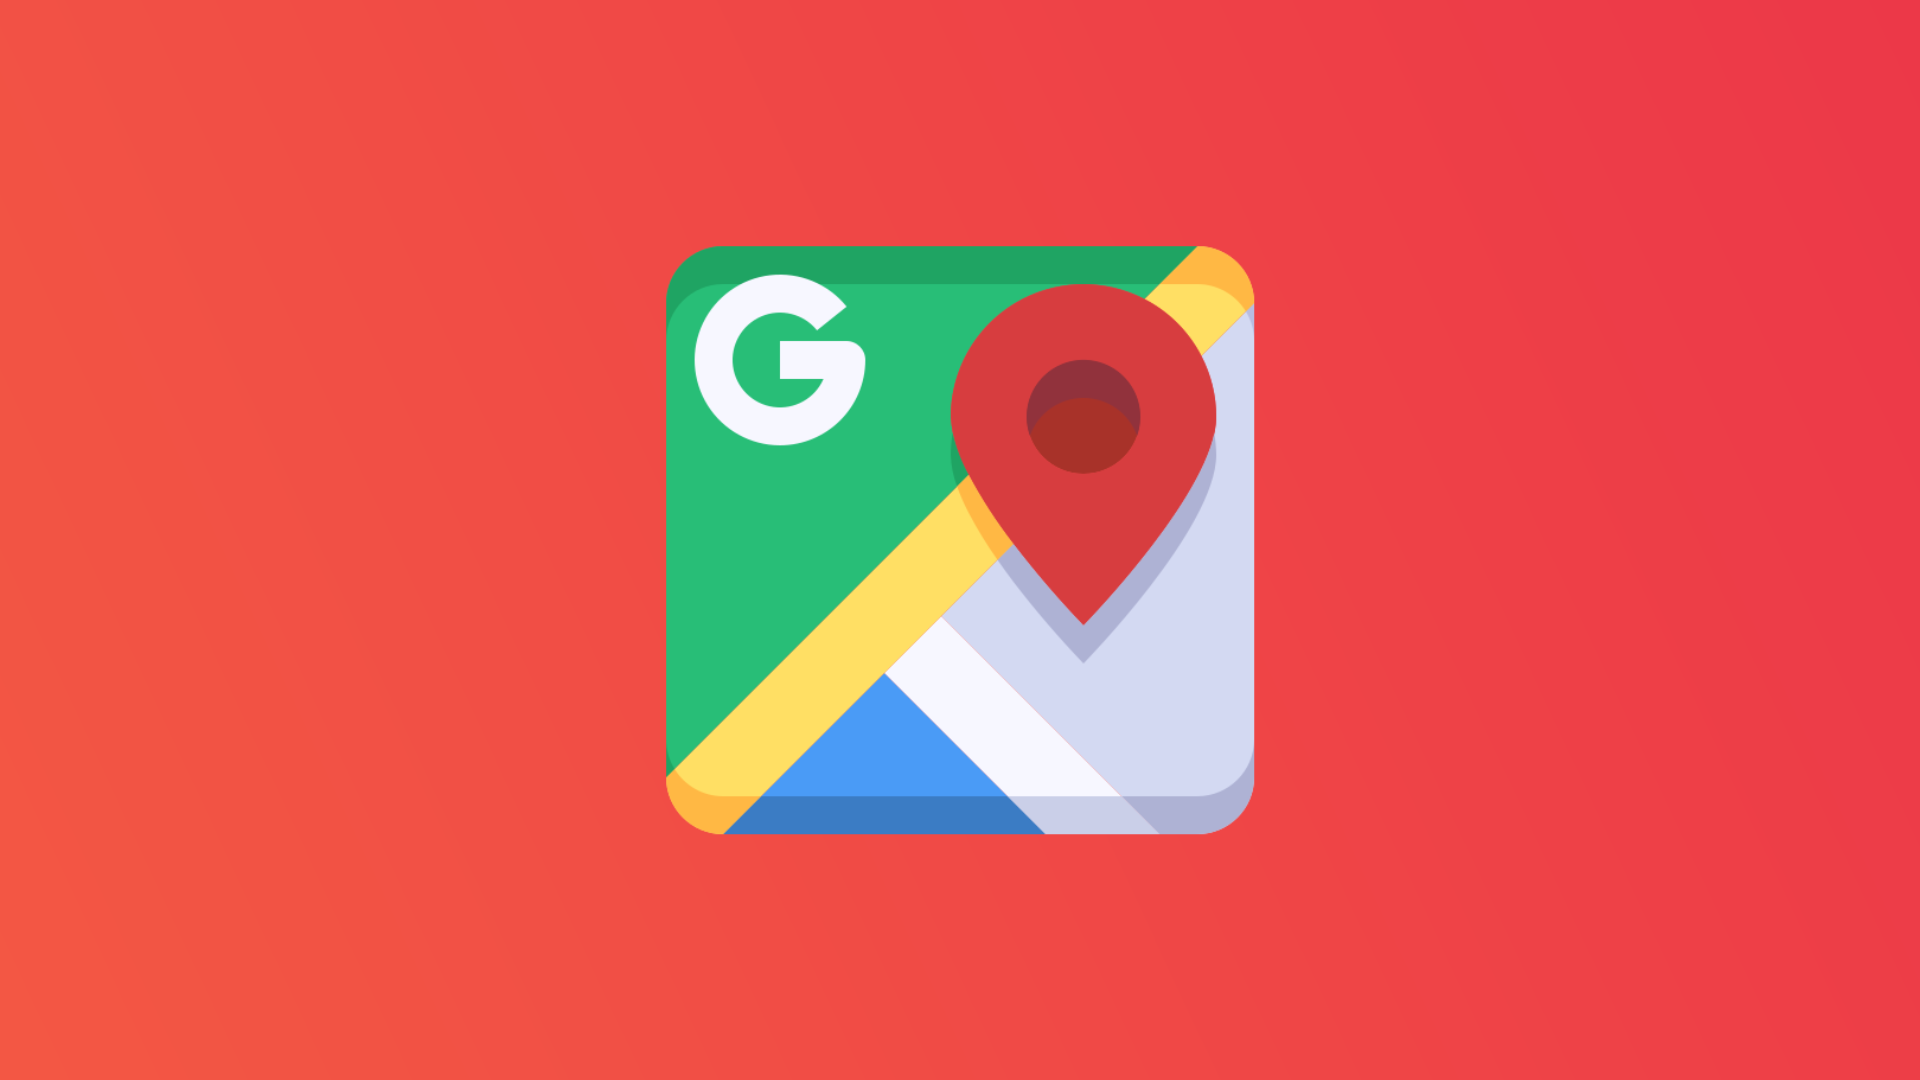 Adding my business to Google Maps (fastest and most effective way)